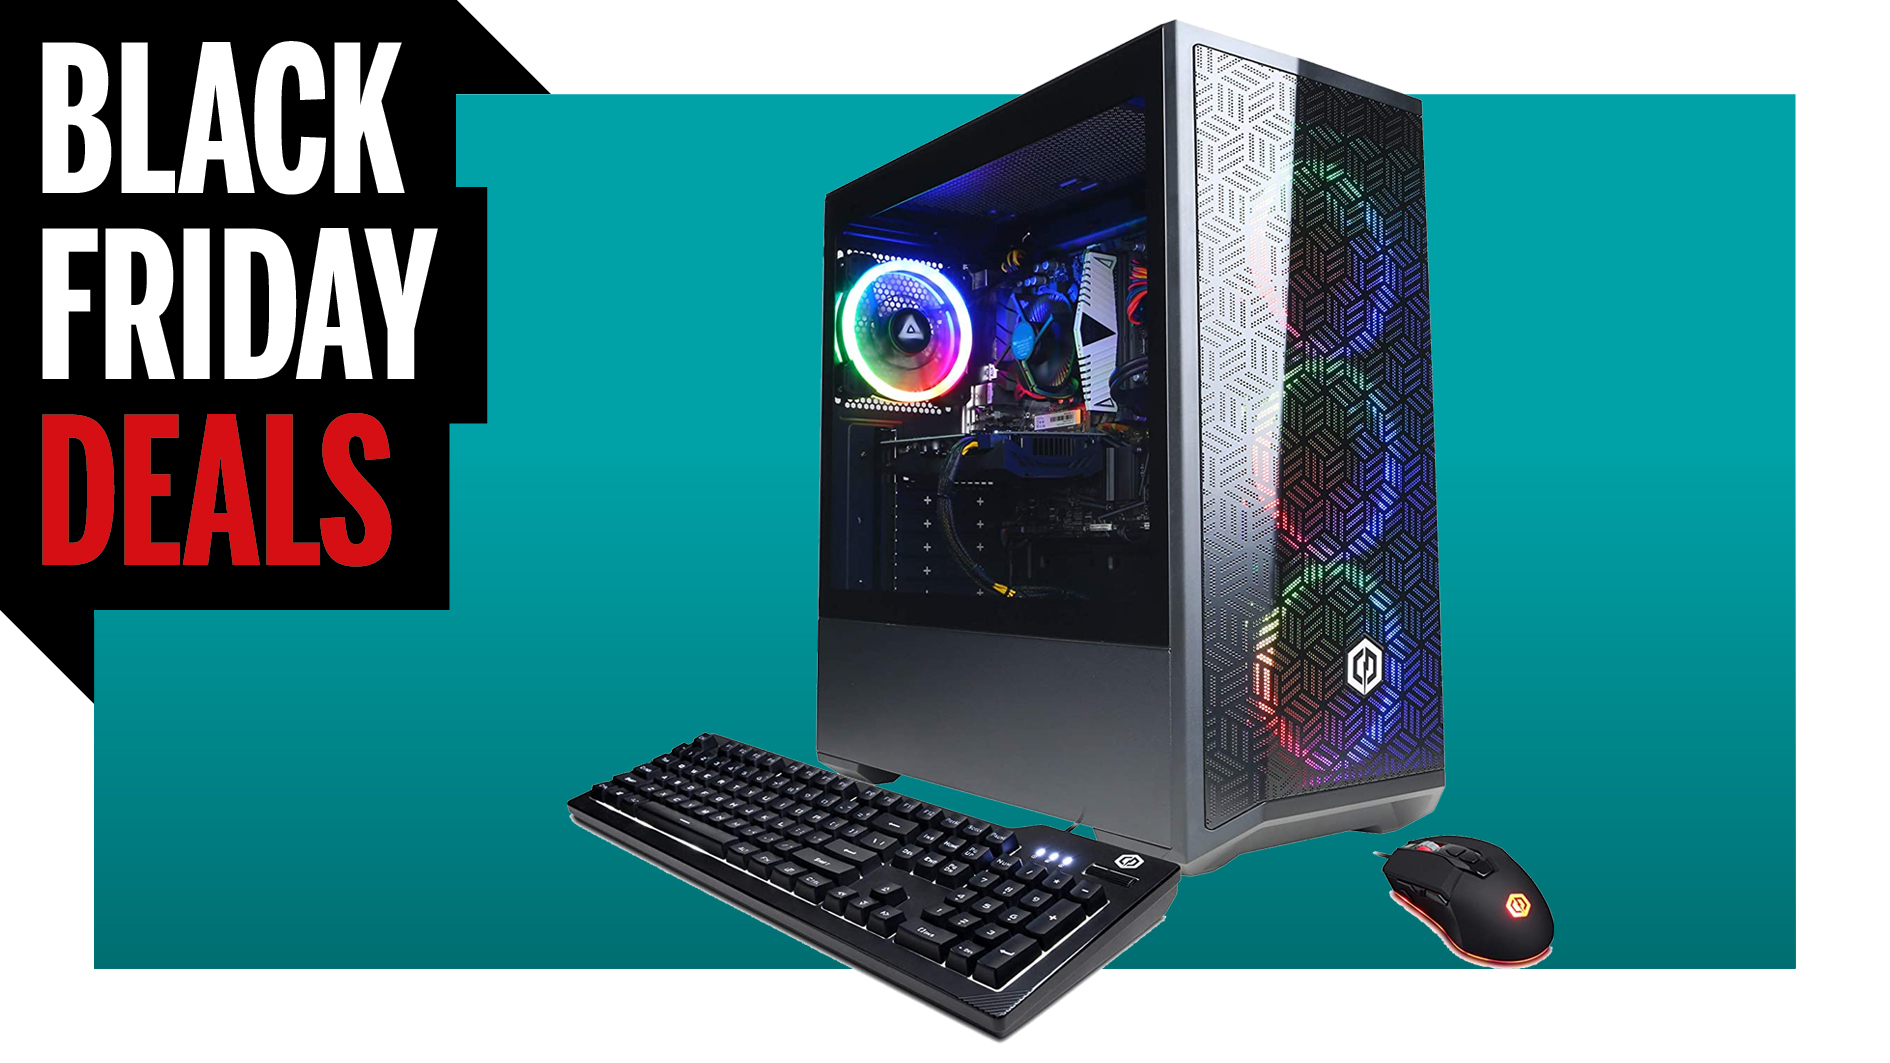  Get a great starter gaming PC with a GTX 1660 Super for just $680 this Black Friday 